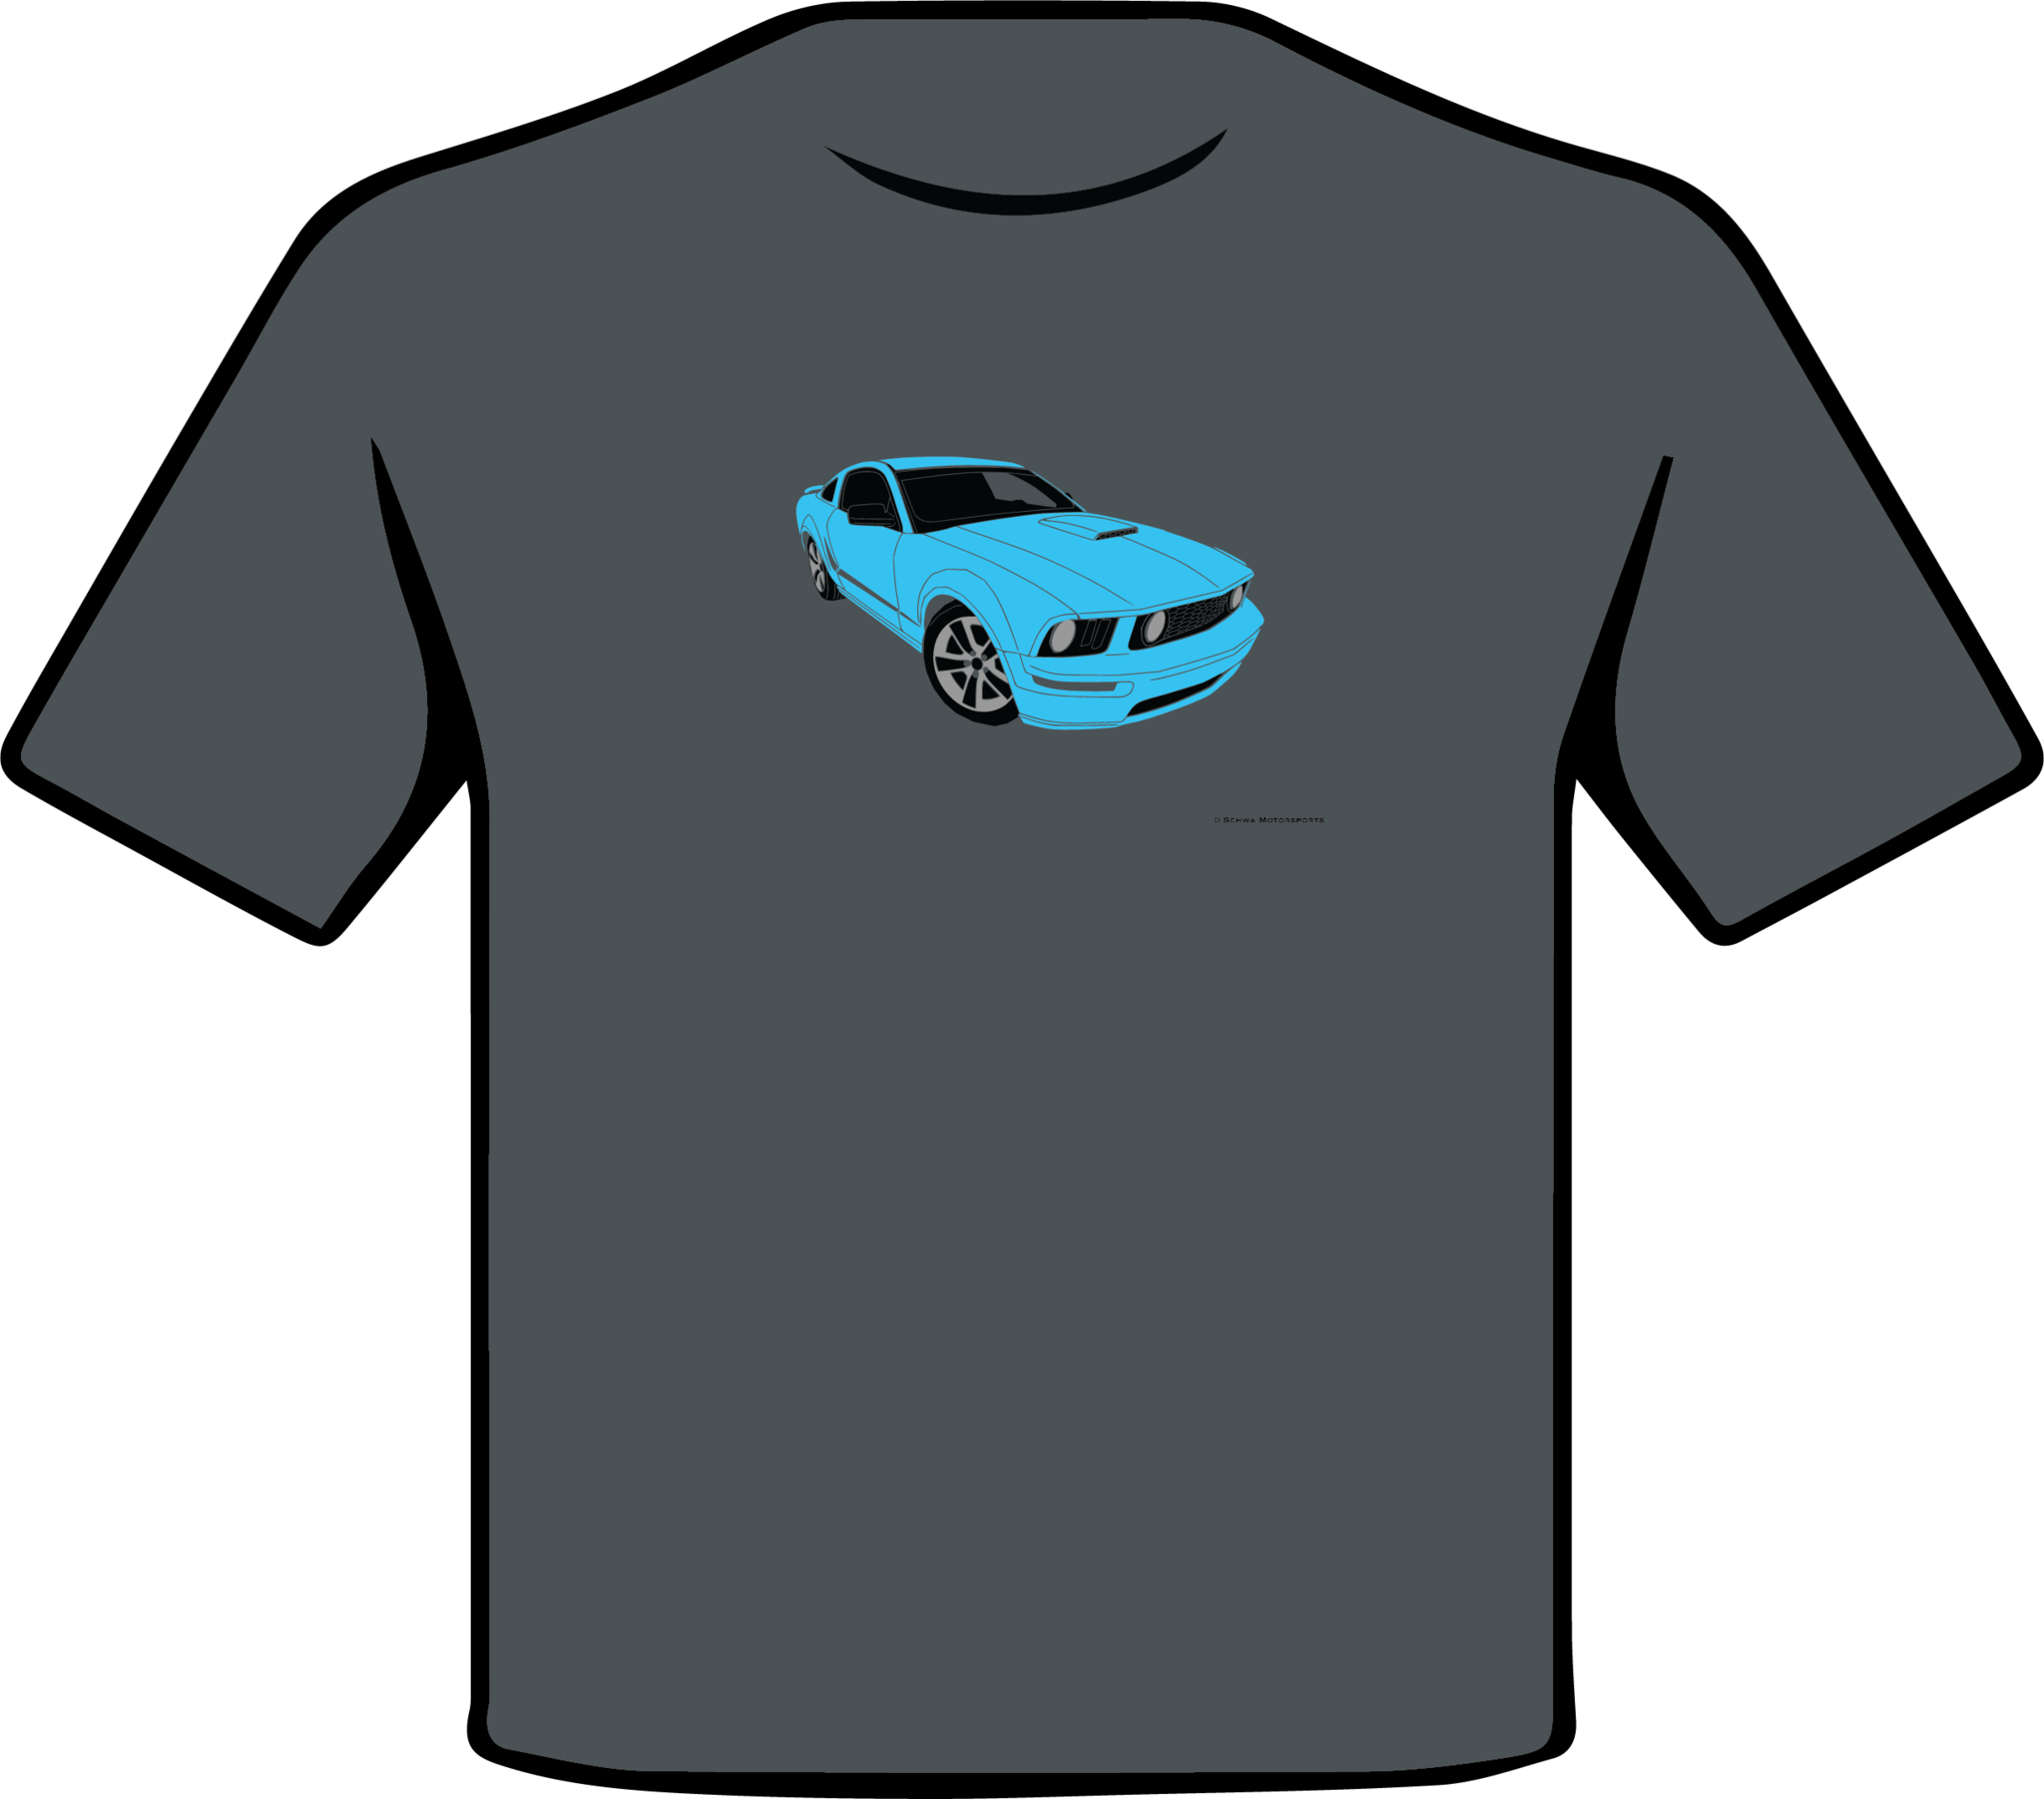 Fifth Generation T-Shirt Motorsports Schwa Angle Designs Mustang Front – 3/4 and Ford Color Multi